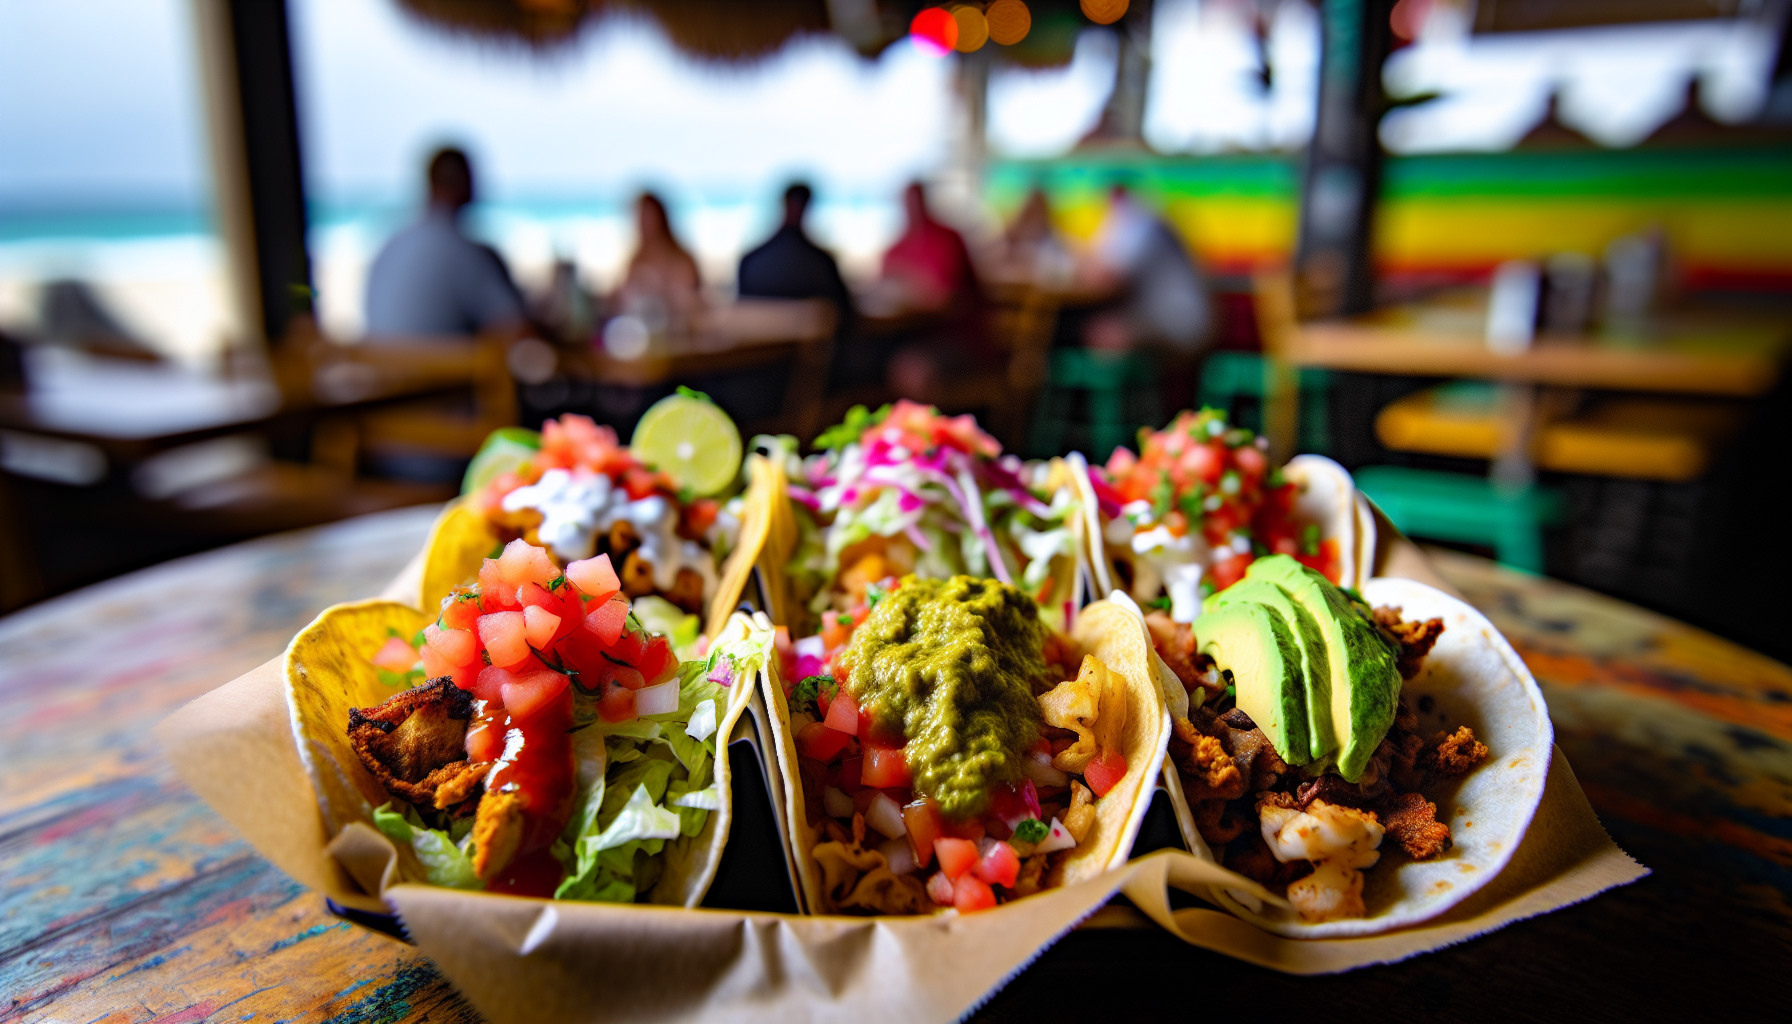 A variety of delicious tacos on display at LuLu's Bait Shack on Fort Lauderdale Beach Blvd